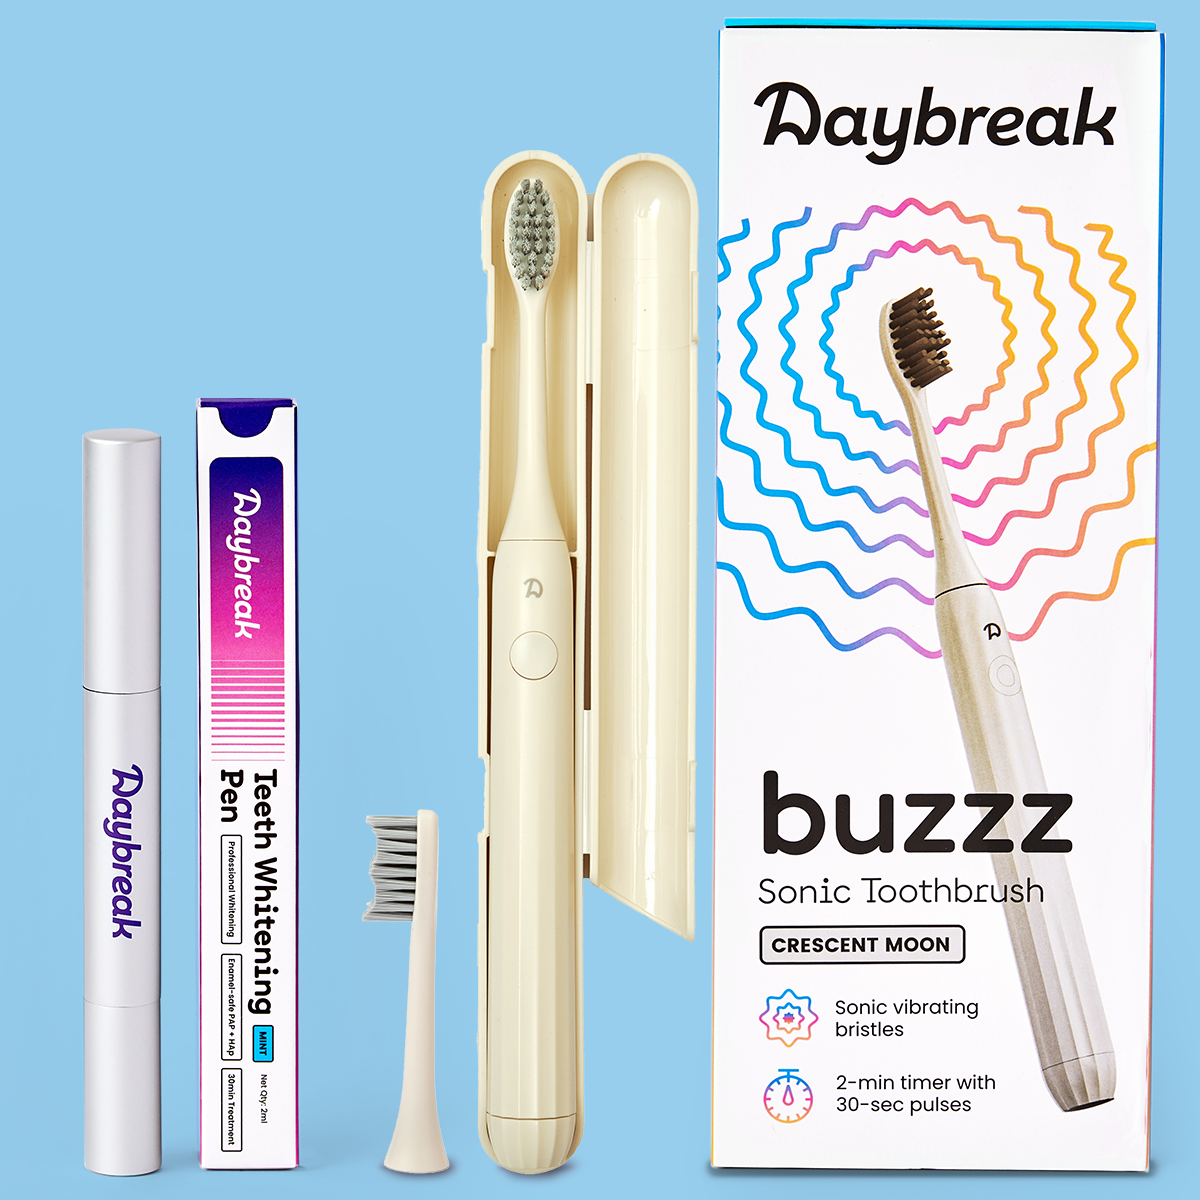 Sonic toothbrush and teeth whitening pen for a dazzling smile